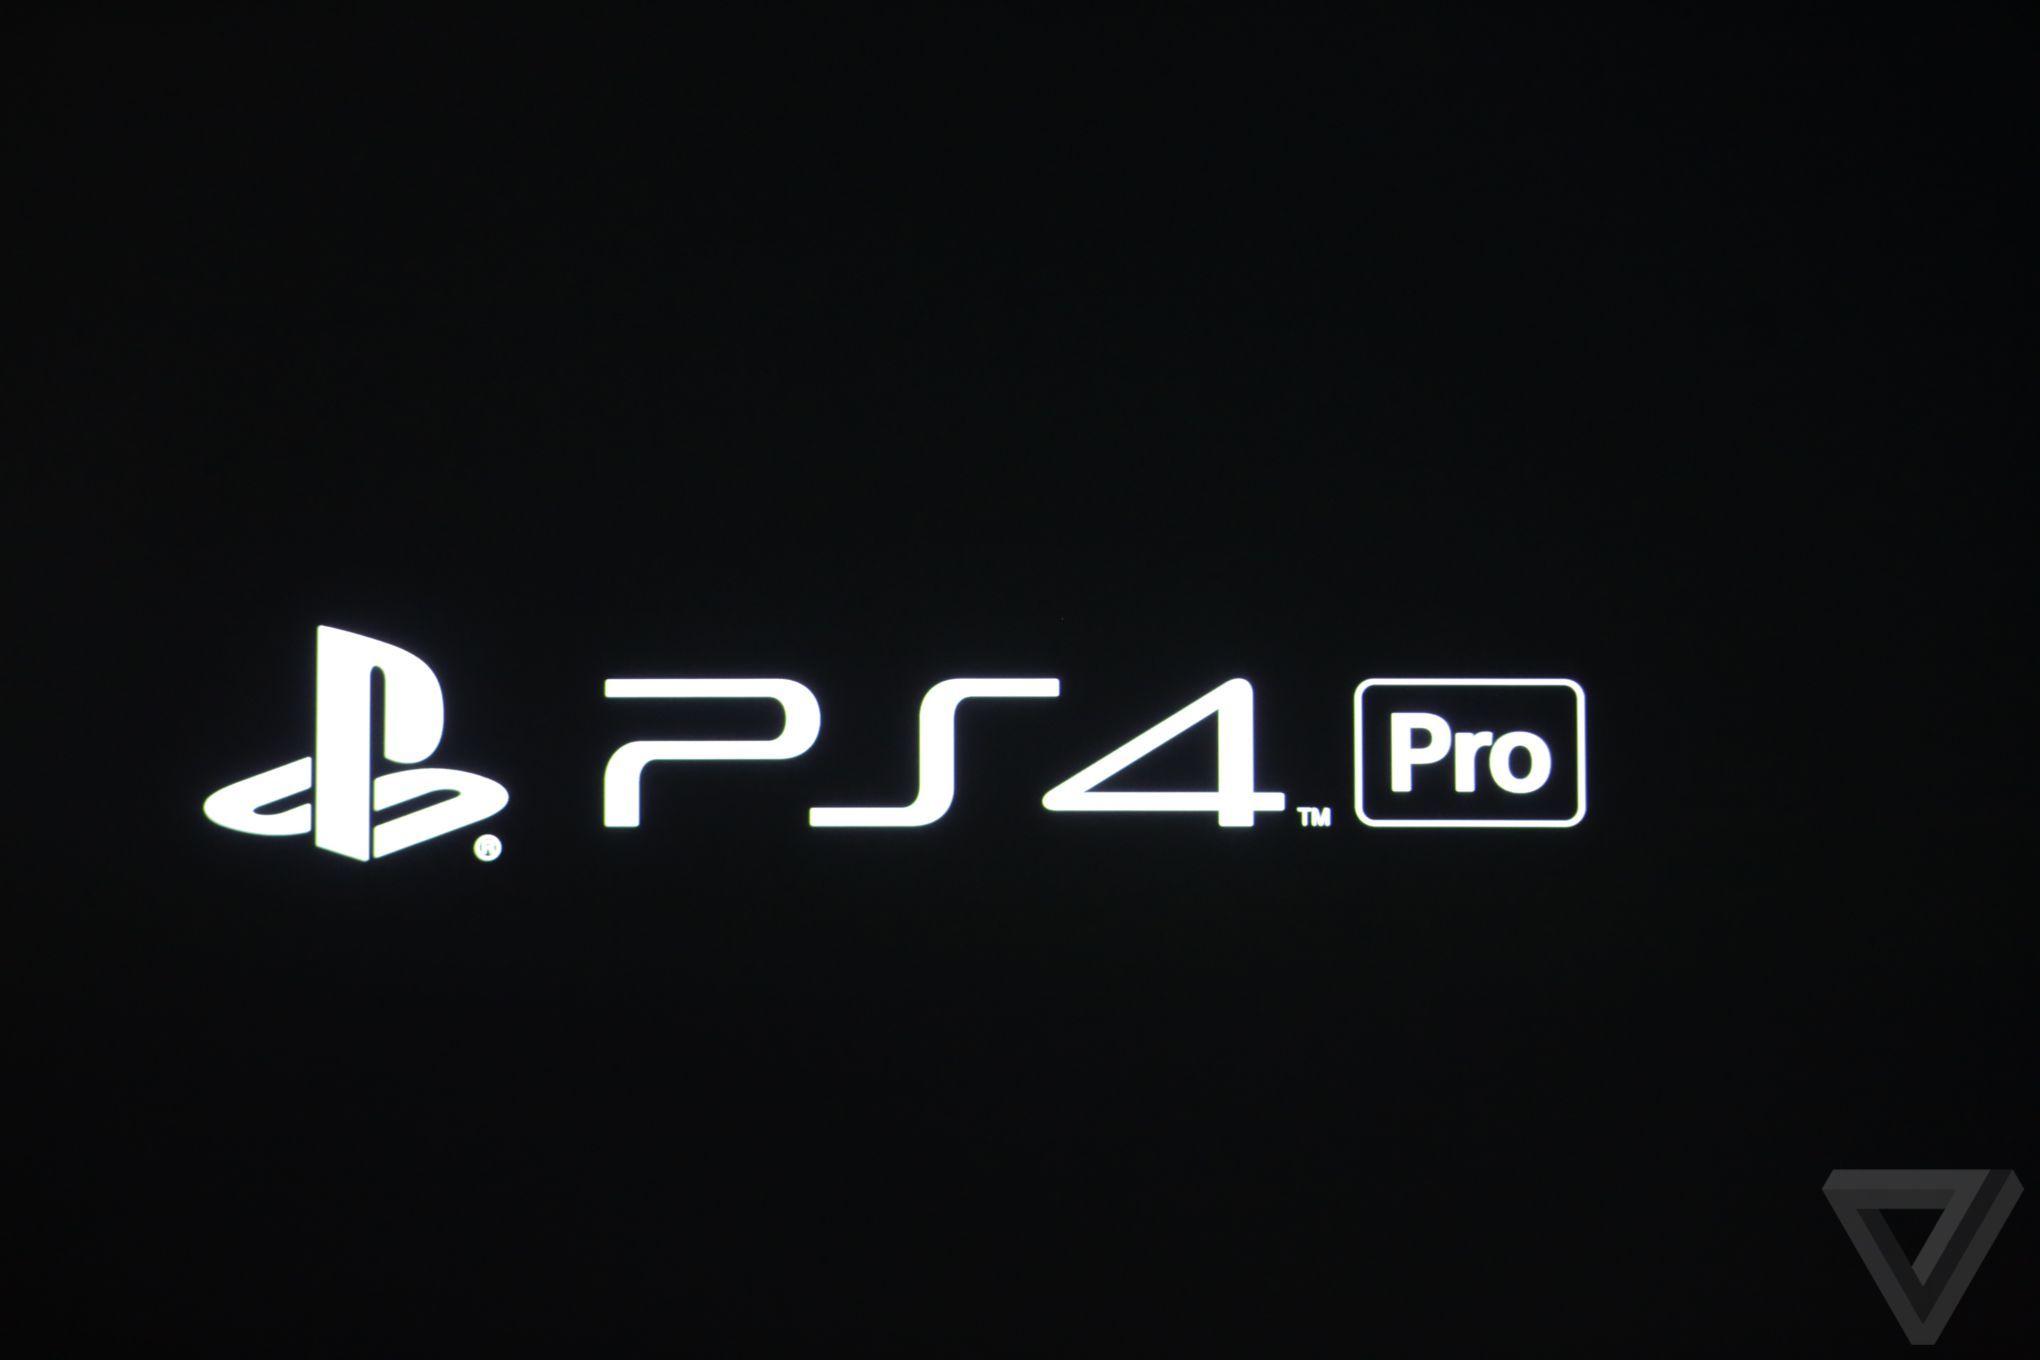 Sony PlayStation 4 Logo - Sony announces PlayStation 4 Pro with 4K HDR gaming for $399 - The Verge